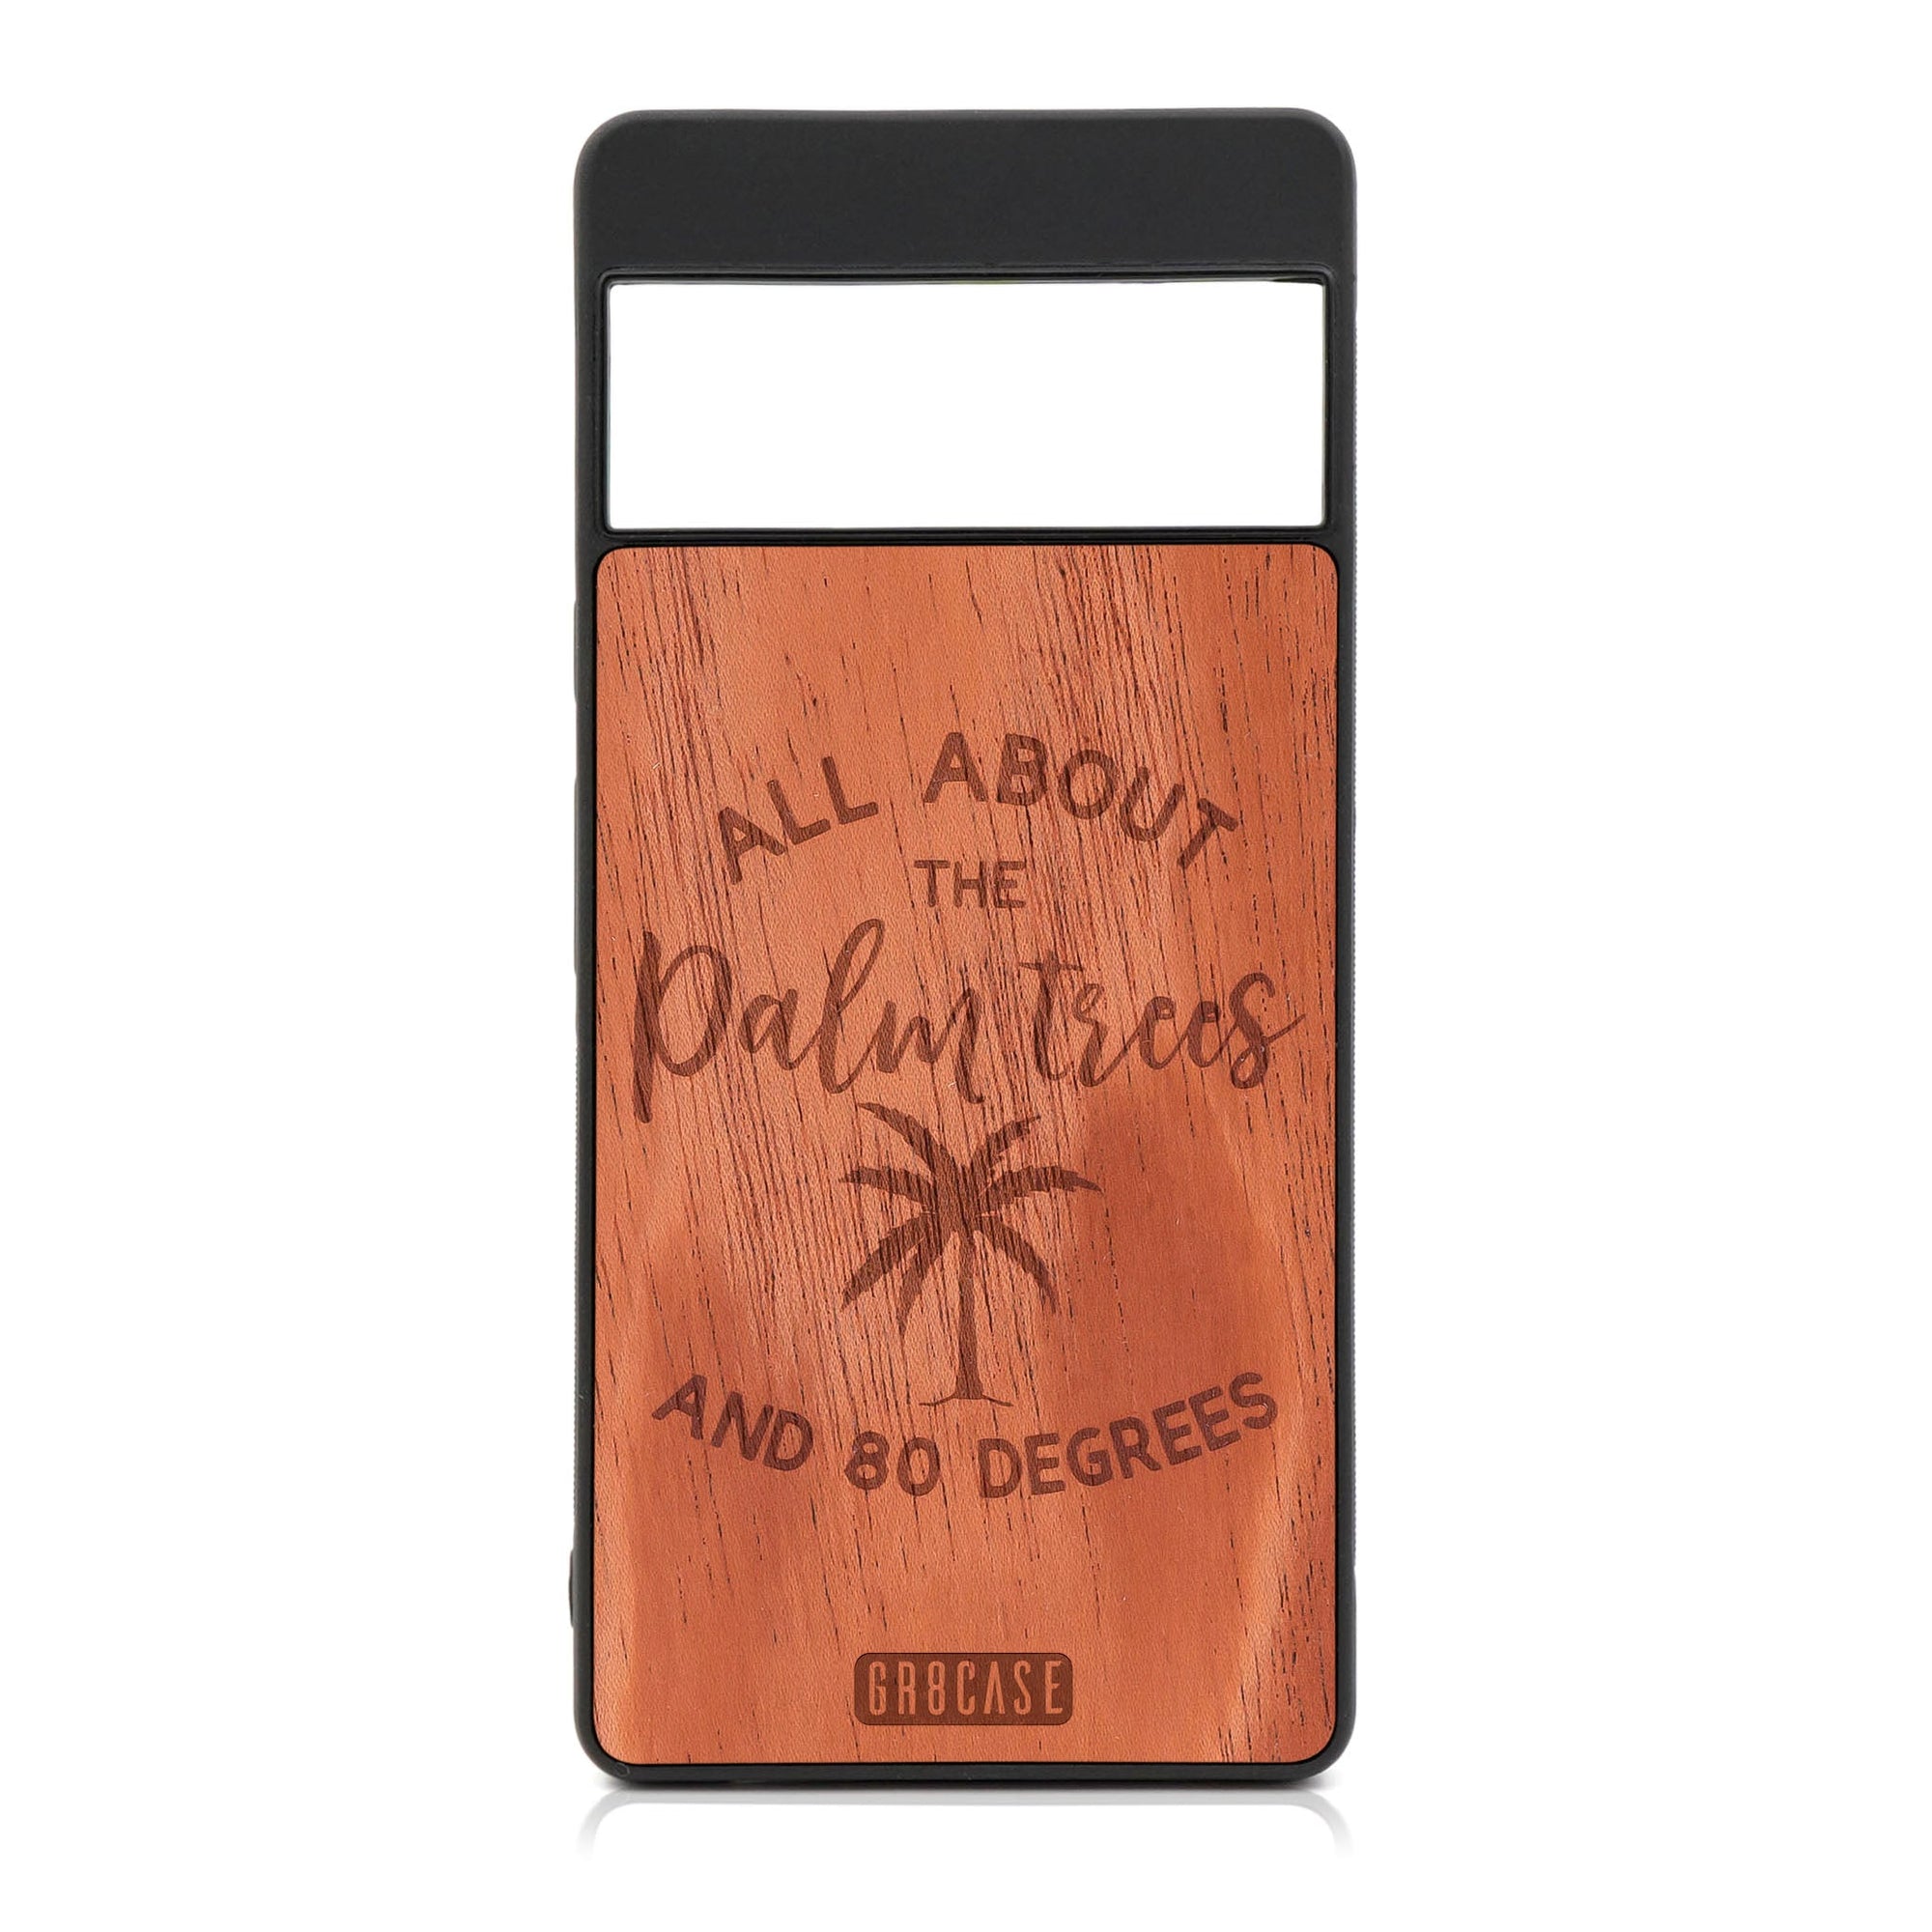 All About The Palm Trees And 80 Degree Design Wood Case For Google Pixel 6 Pro